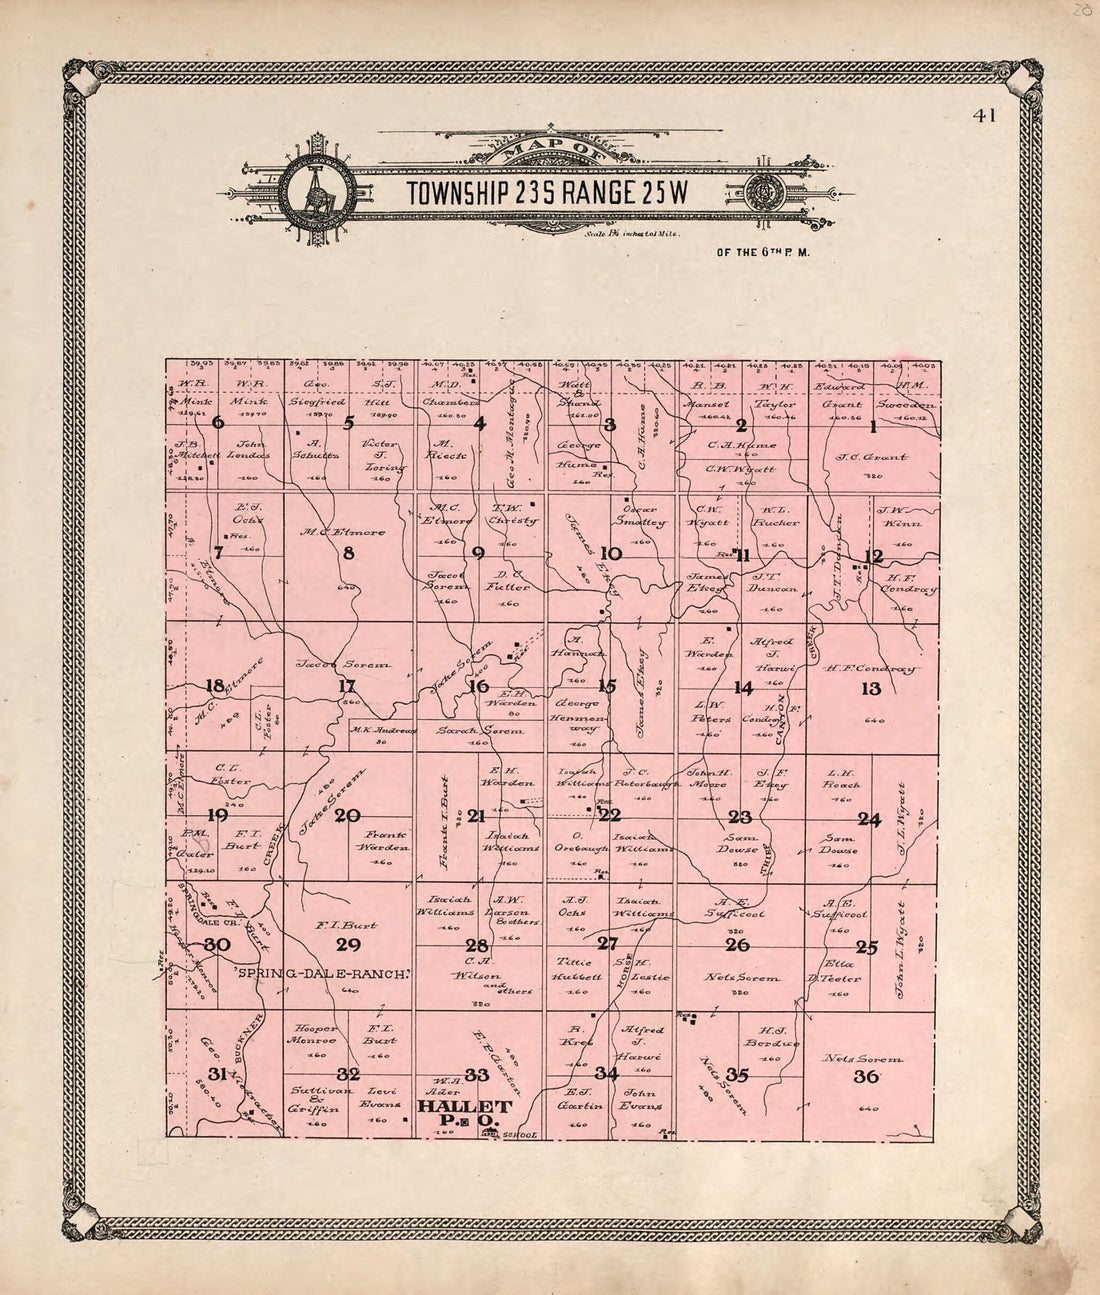 This old map of Map of Township 23 S Range 25 W from Standard Atlas of Hodgeman County, Kansas from 1907 was created by  Geo. A. Ogle &amp; Co in 1907